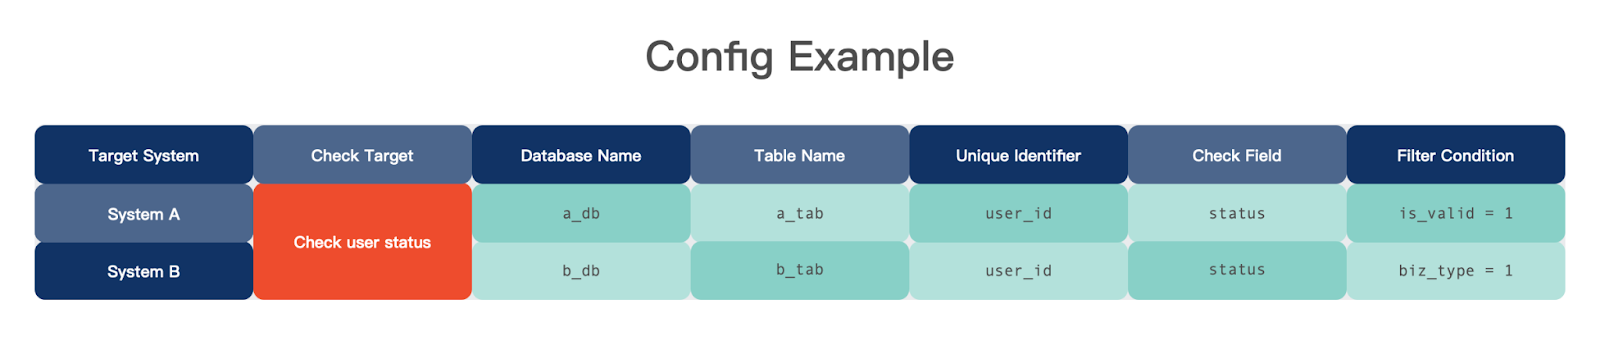 Fig6. Config Example